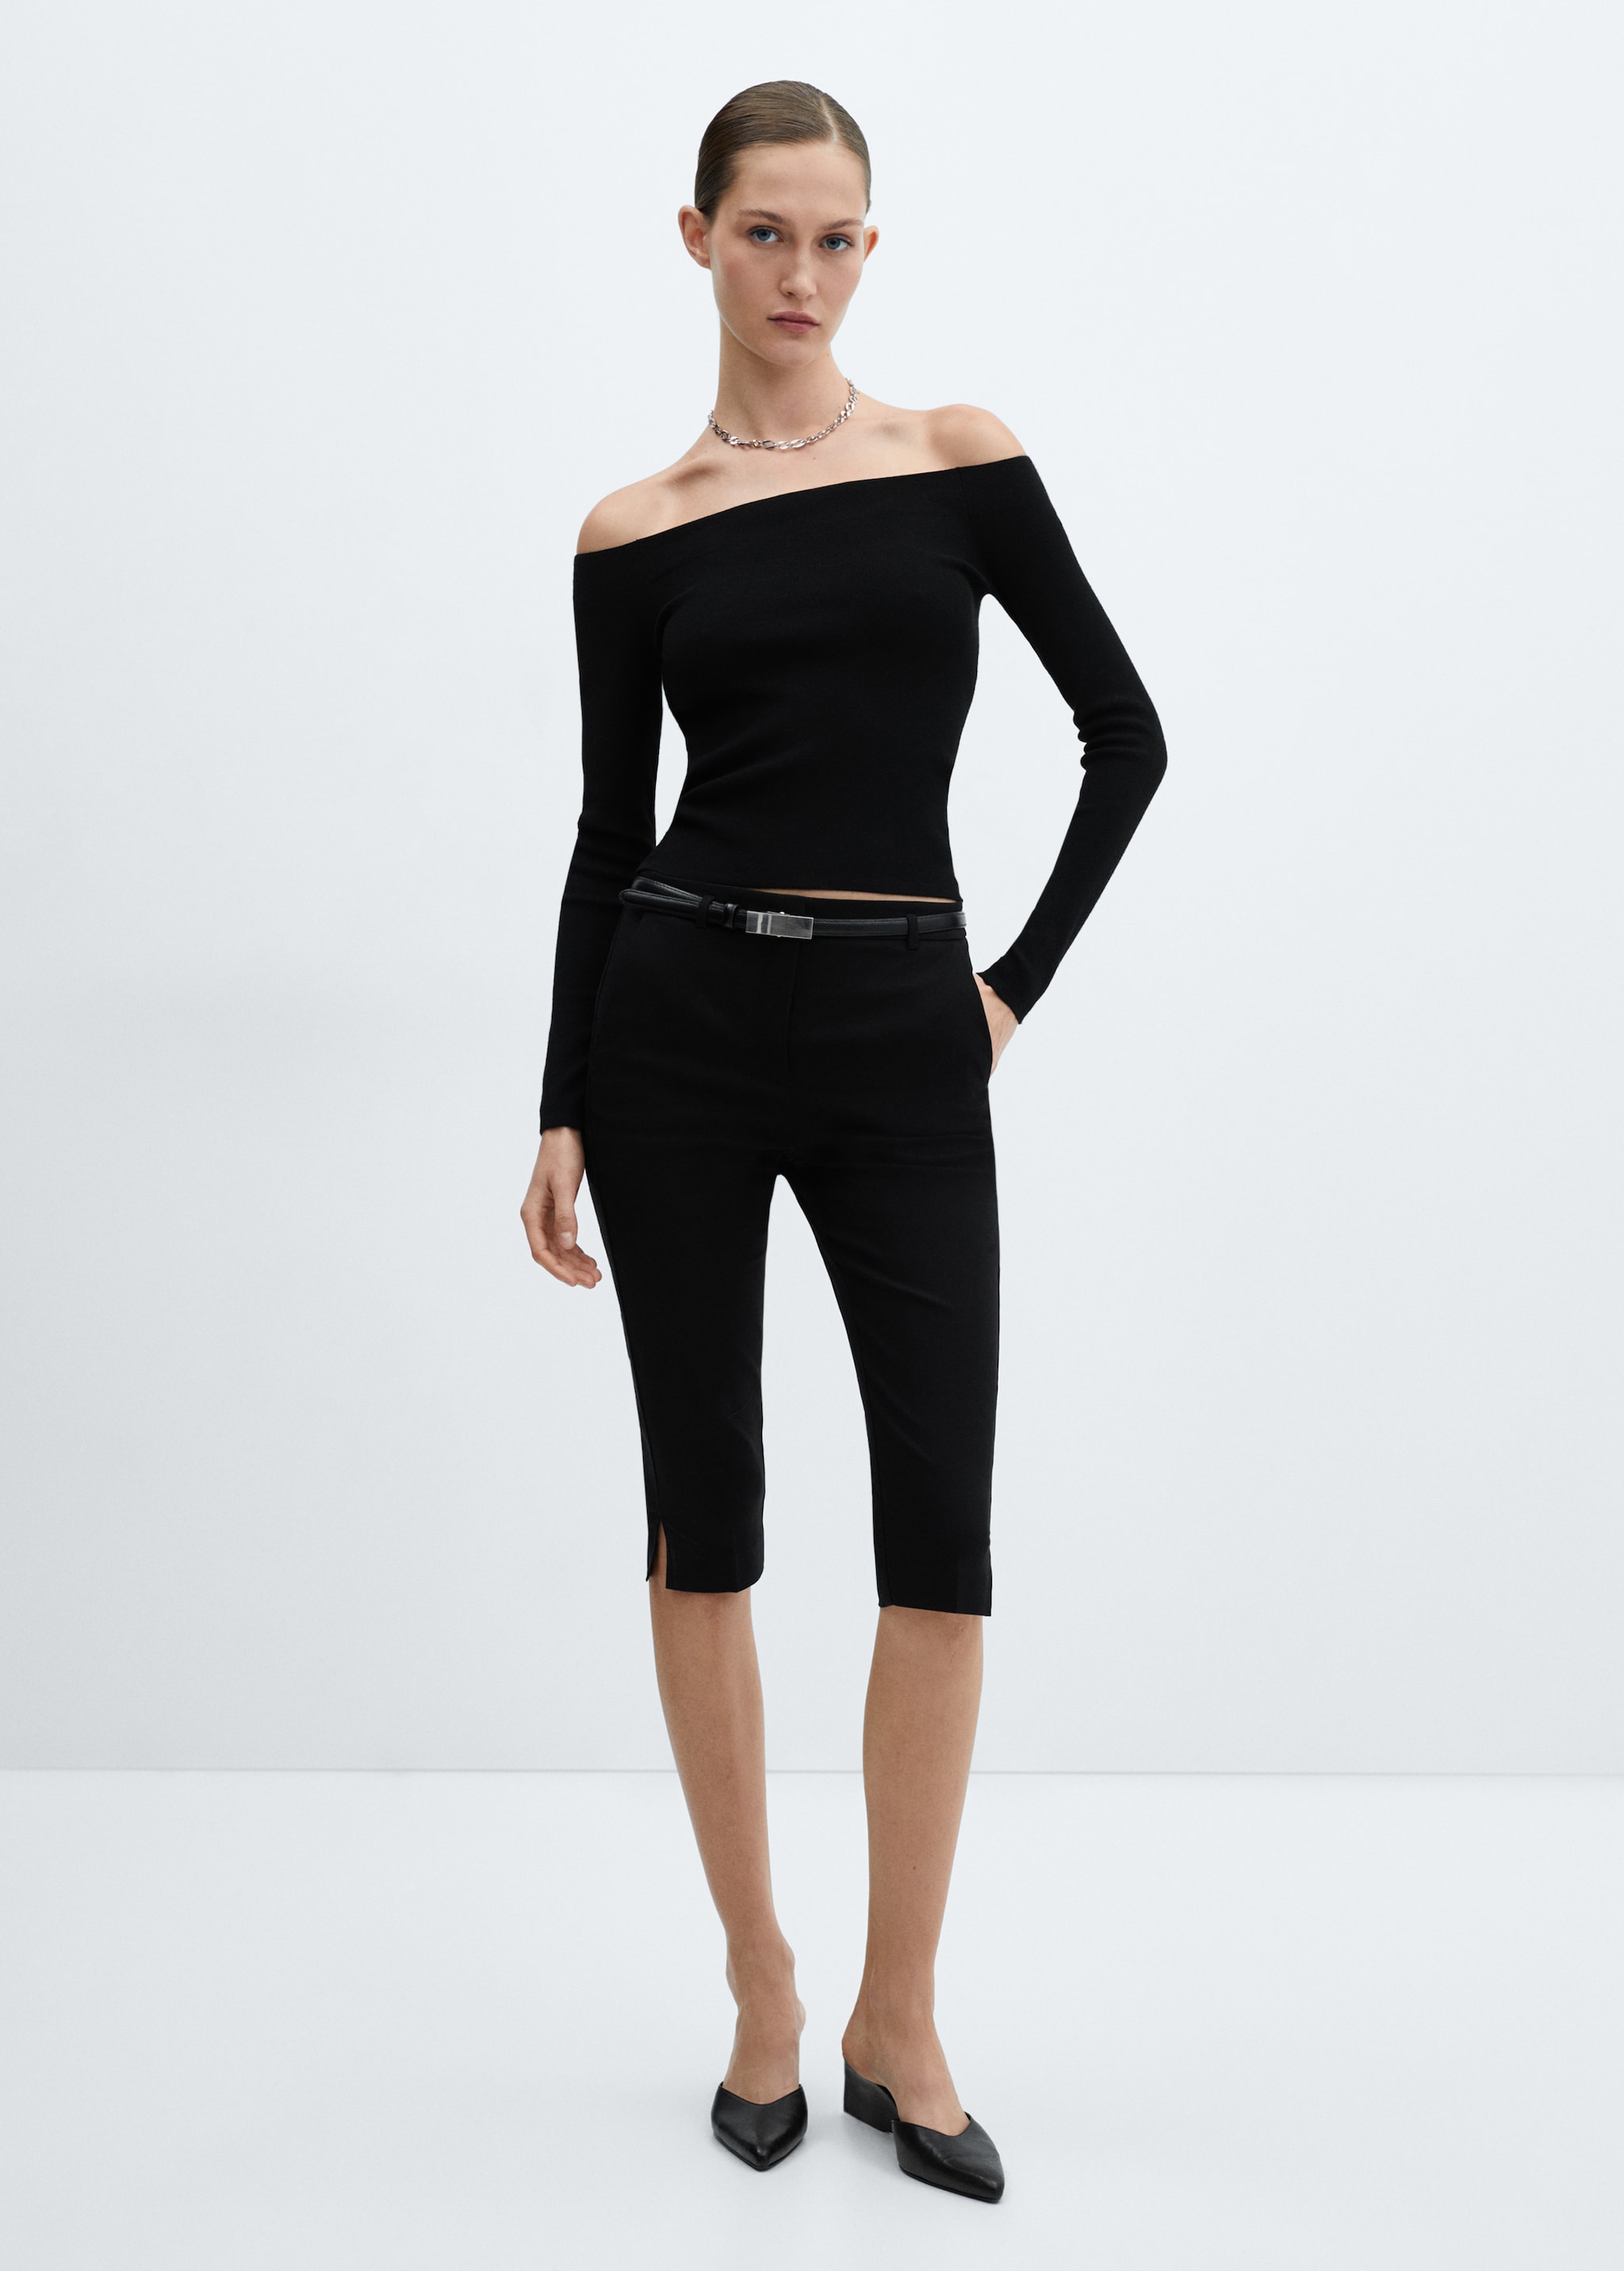 Belted capri trousers - General plane